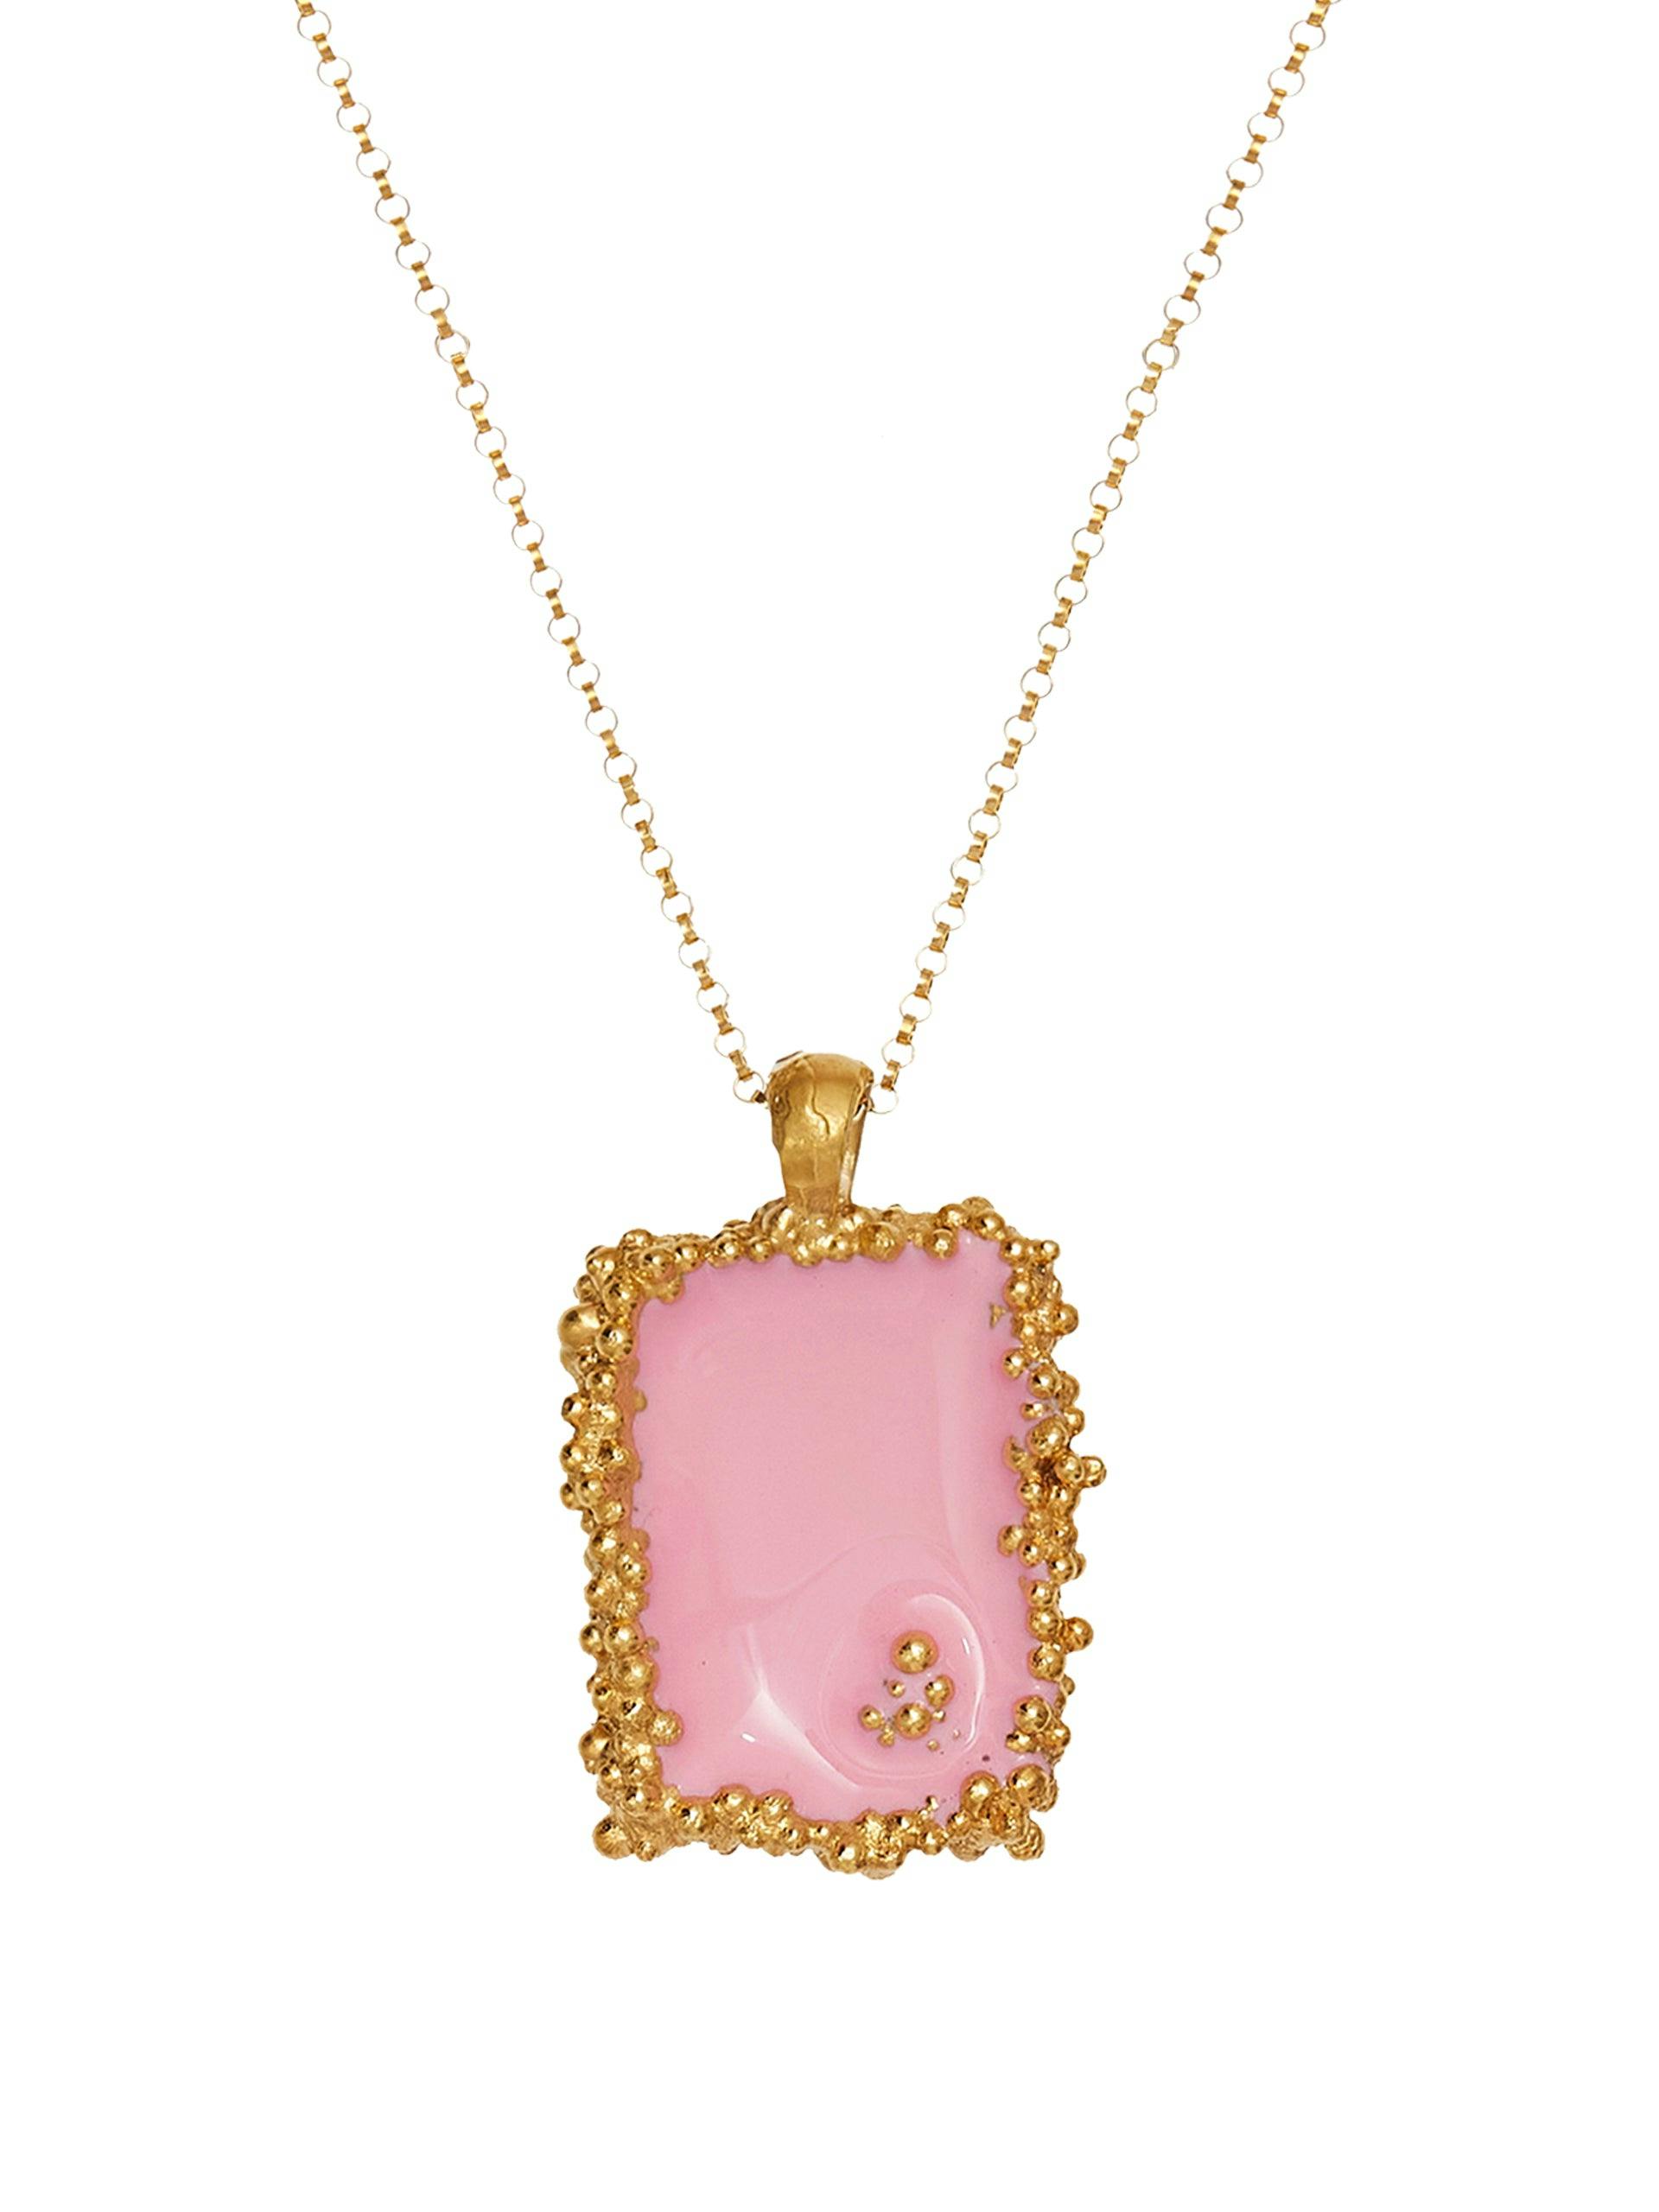 ‘Sun-Faded Fresco Vignette’ pink and gold necklace